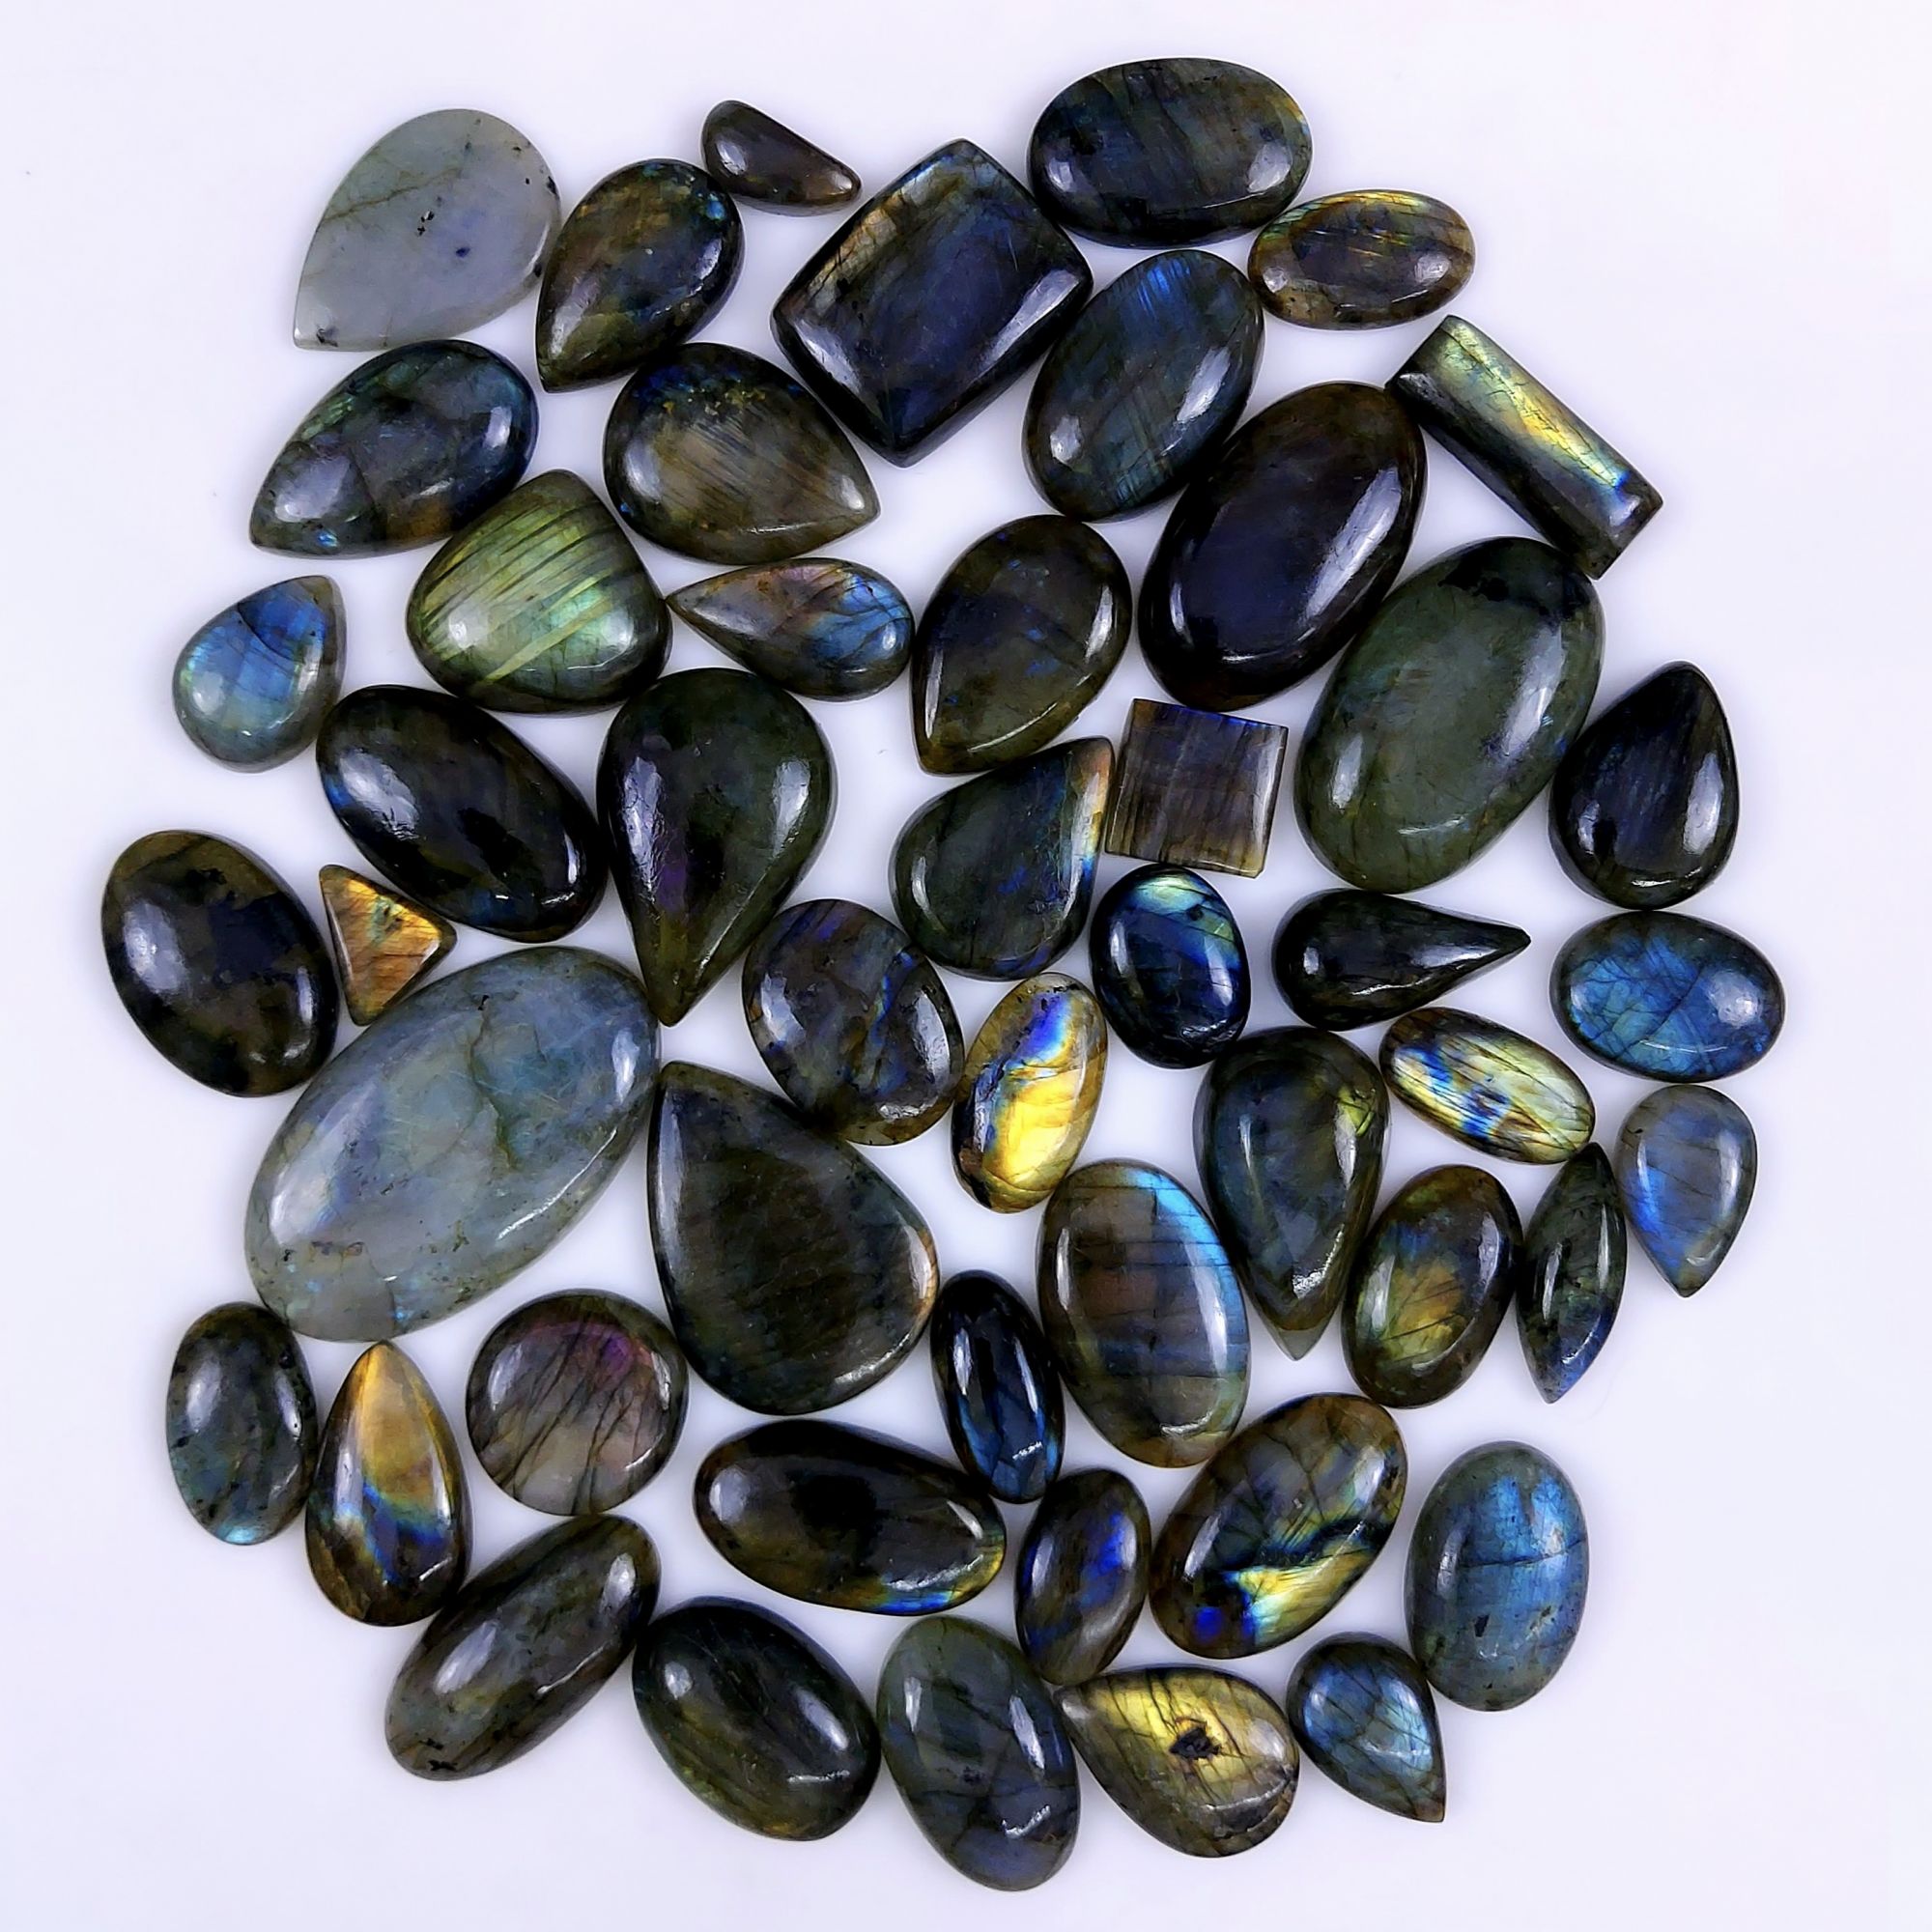 49pc 1707Cts Labradorite Cabochon Multifire Healing Crystal For Jewelry Supplies, Labradorite Necklace Handmade Wire Wrapped Gemstone Pendant 52x30 16x12mm#6266